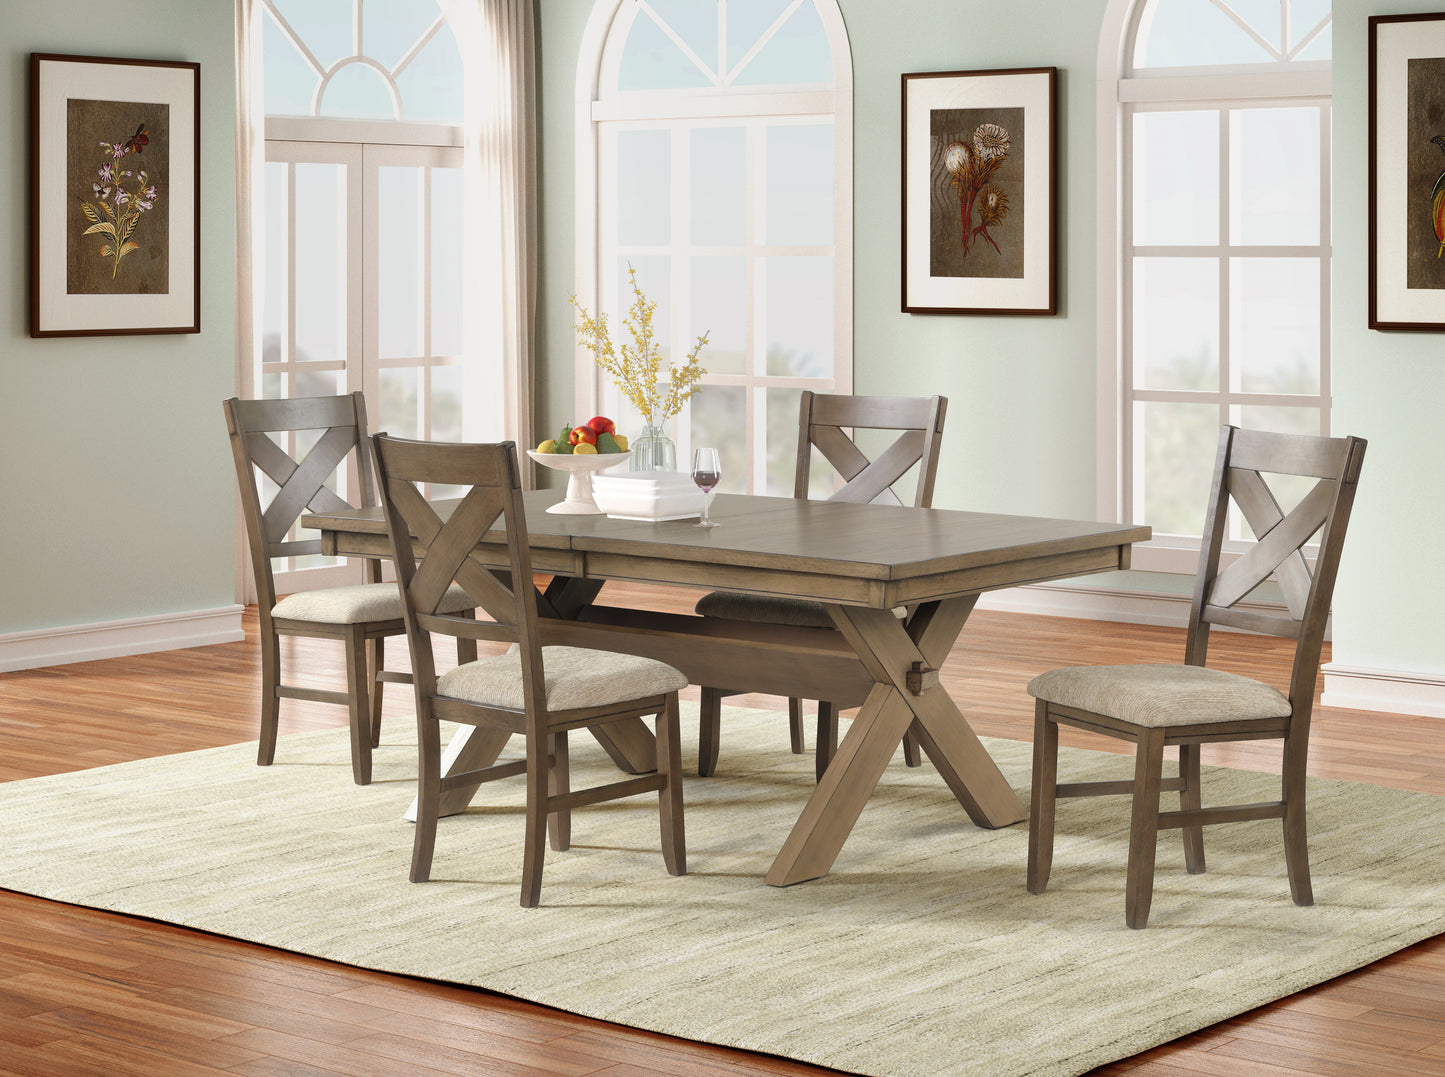 Raven Wood 5-Piece Dining Set, Extendable Trestle Dining Table with 4 Chairs, Glazed Pine Brown